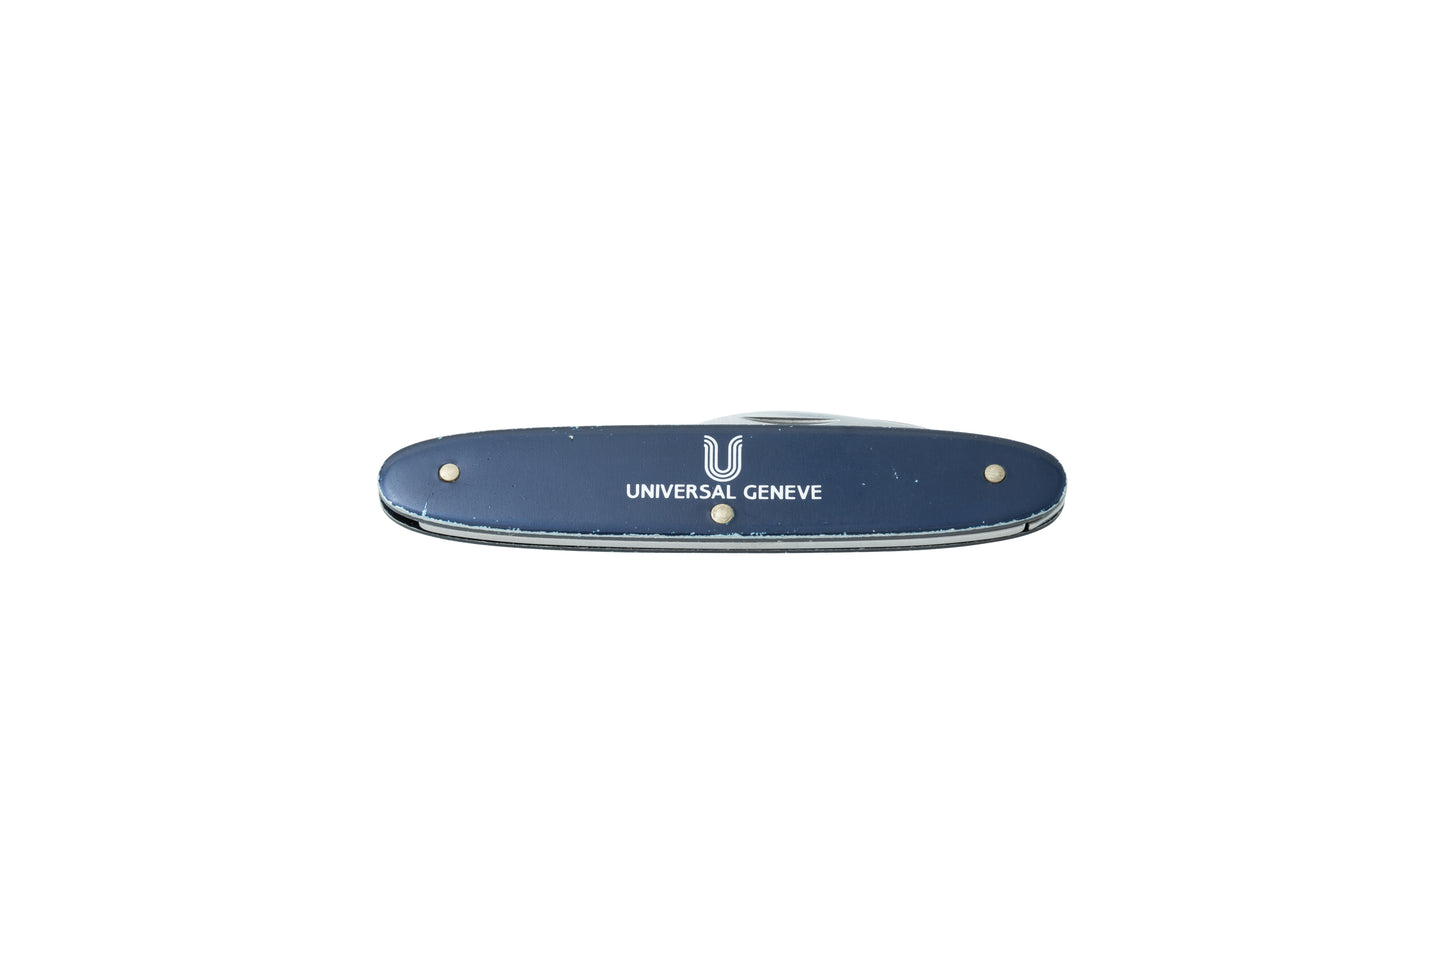 Wenger Case Tool For Universal Geneve